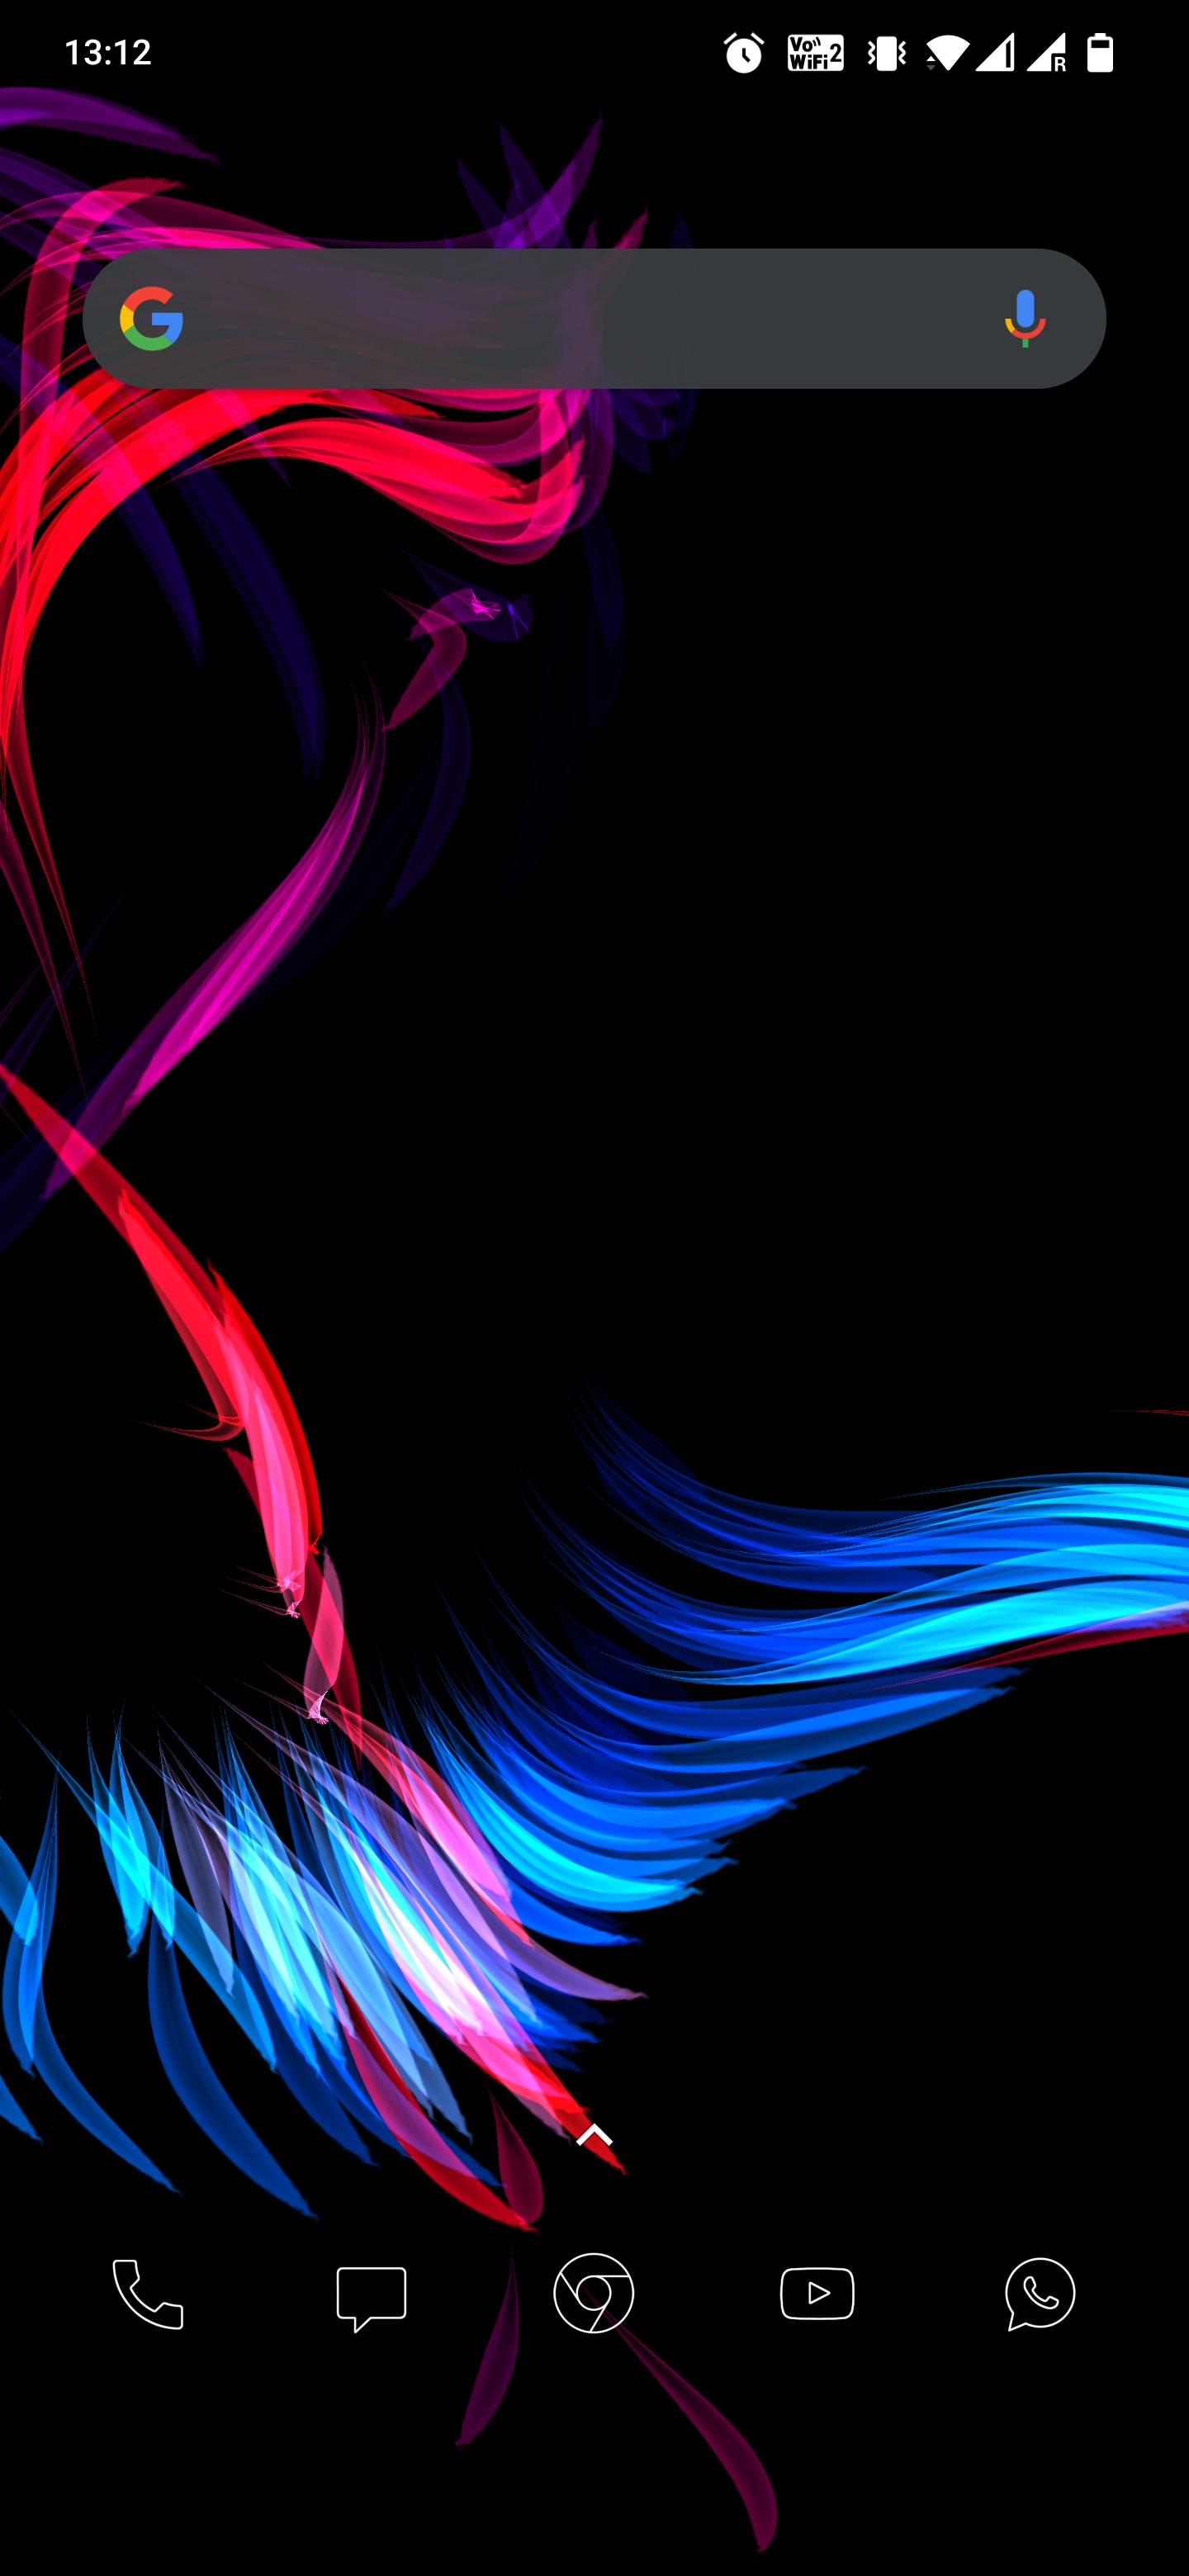 Minimal Dark And An Amoled Live Wallpaper Best Phone With A